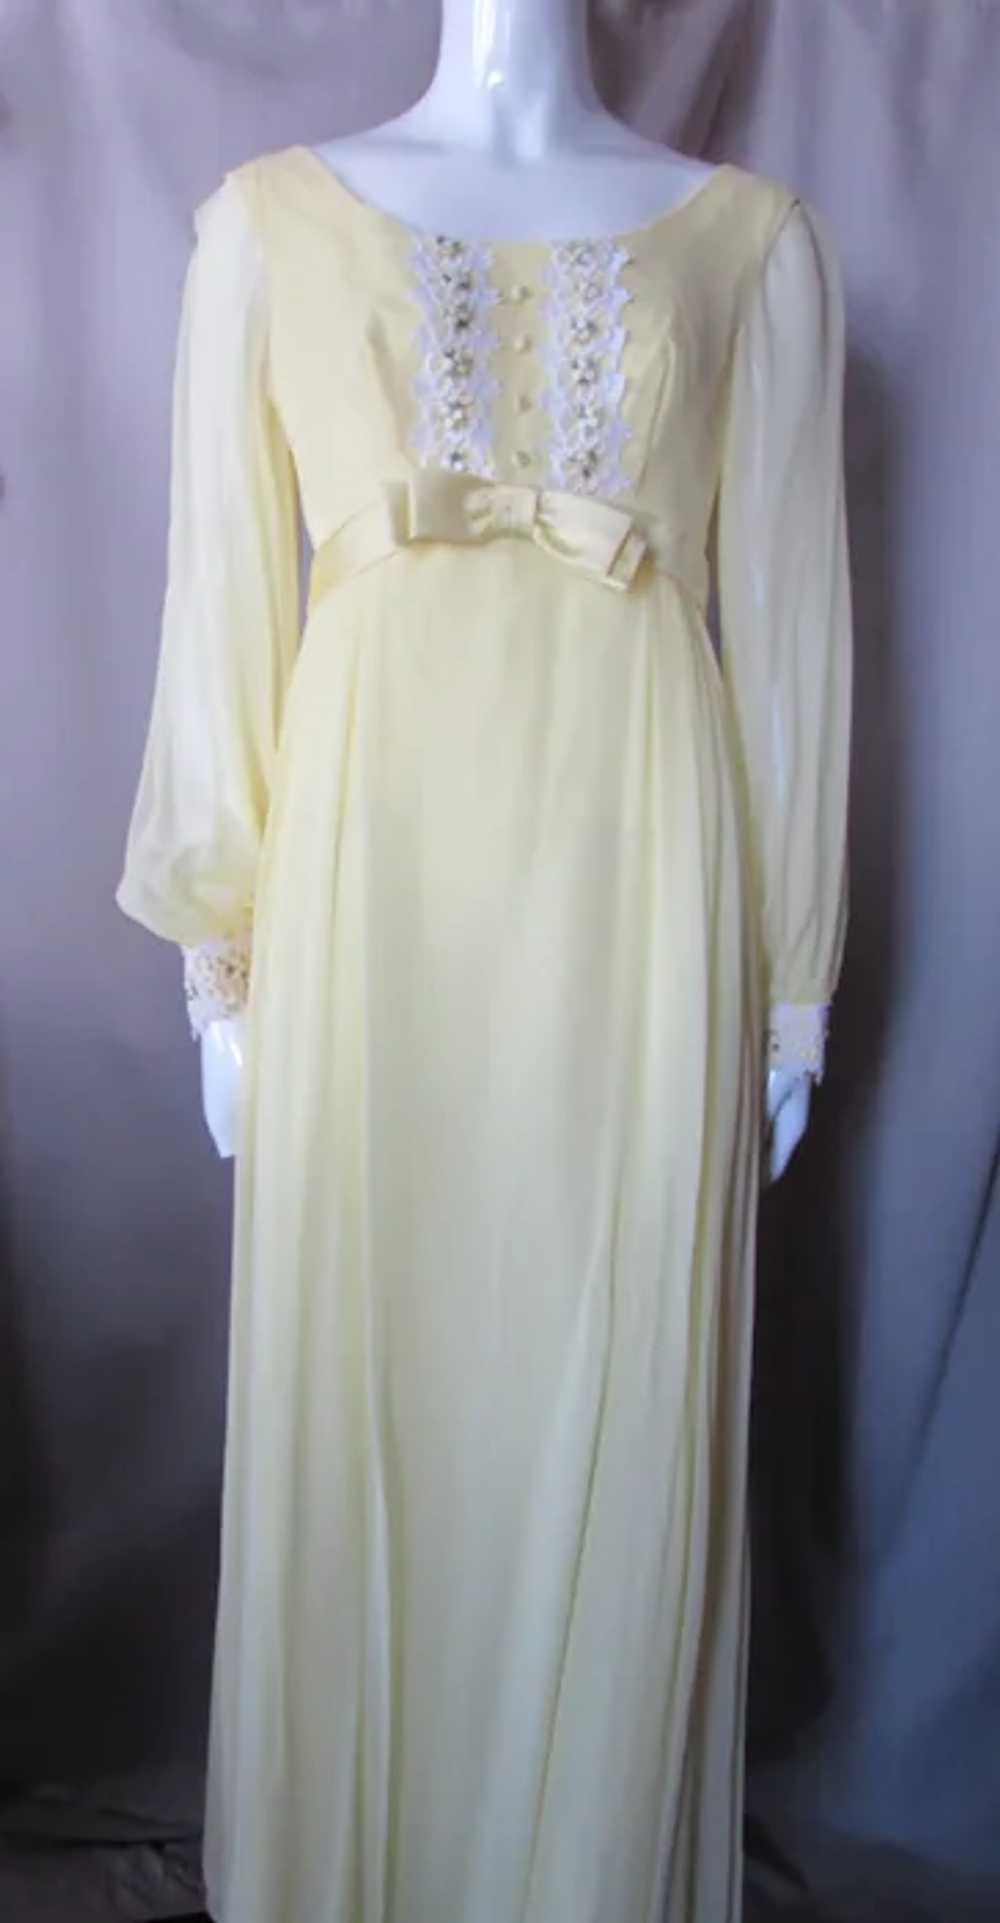 SALE Lovley 1970 Era Bridesmaid or Prom Dress in … - image 2